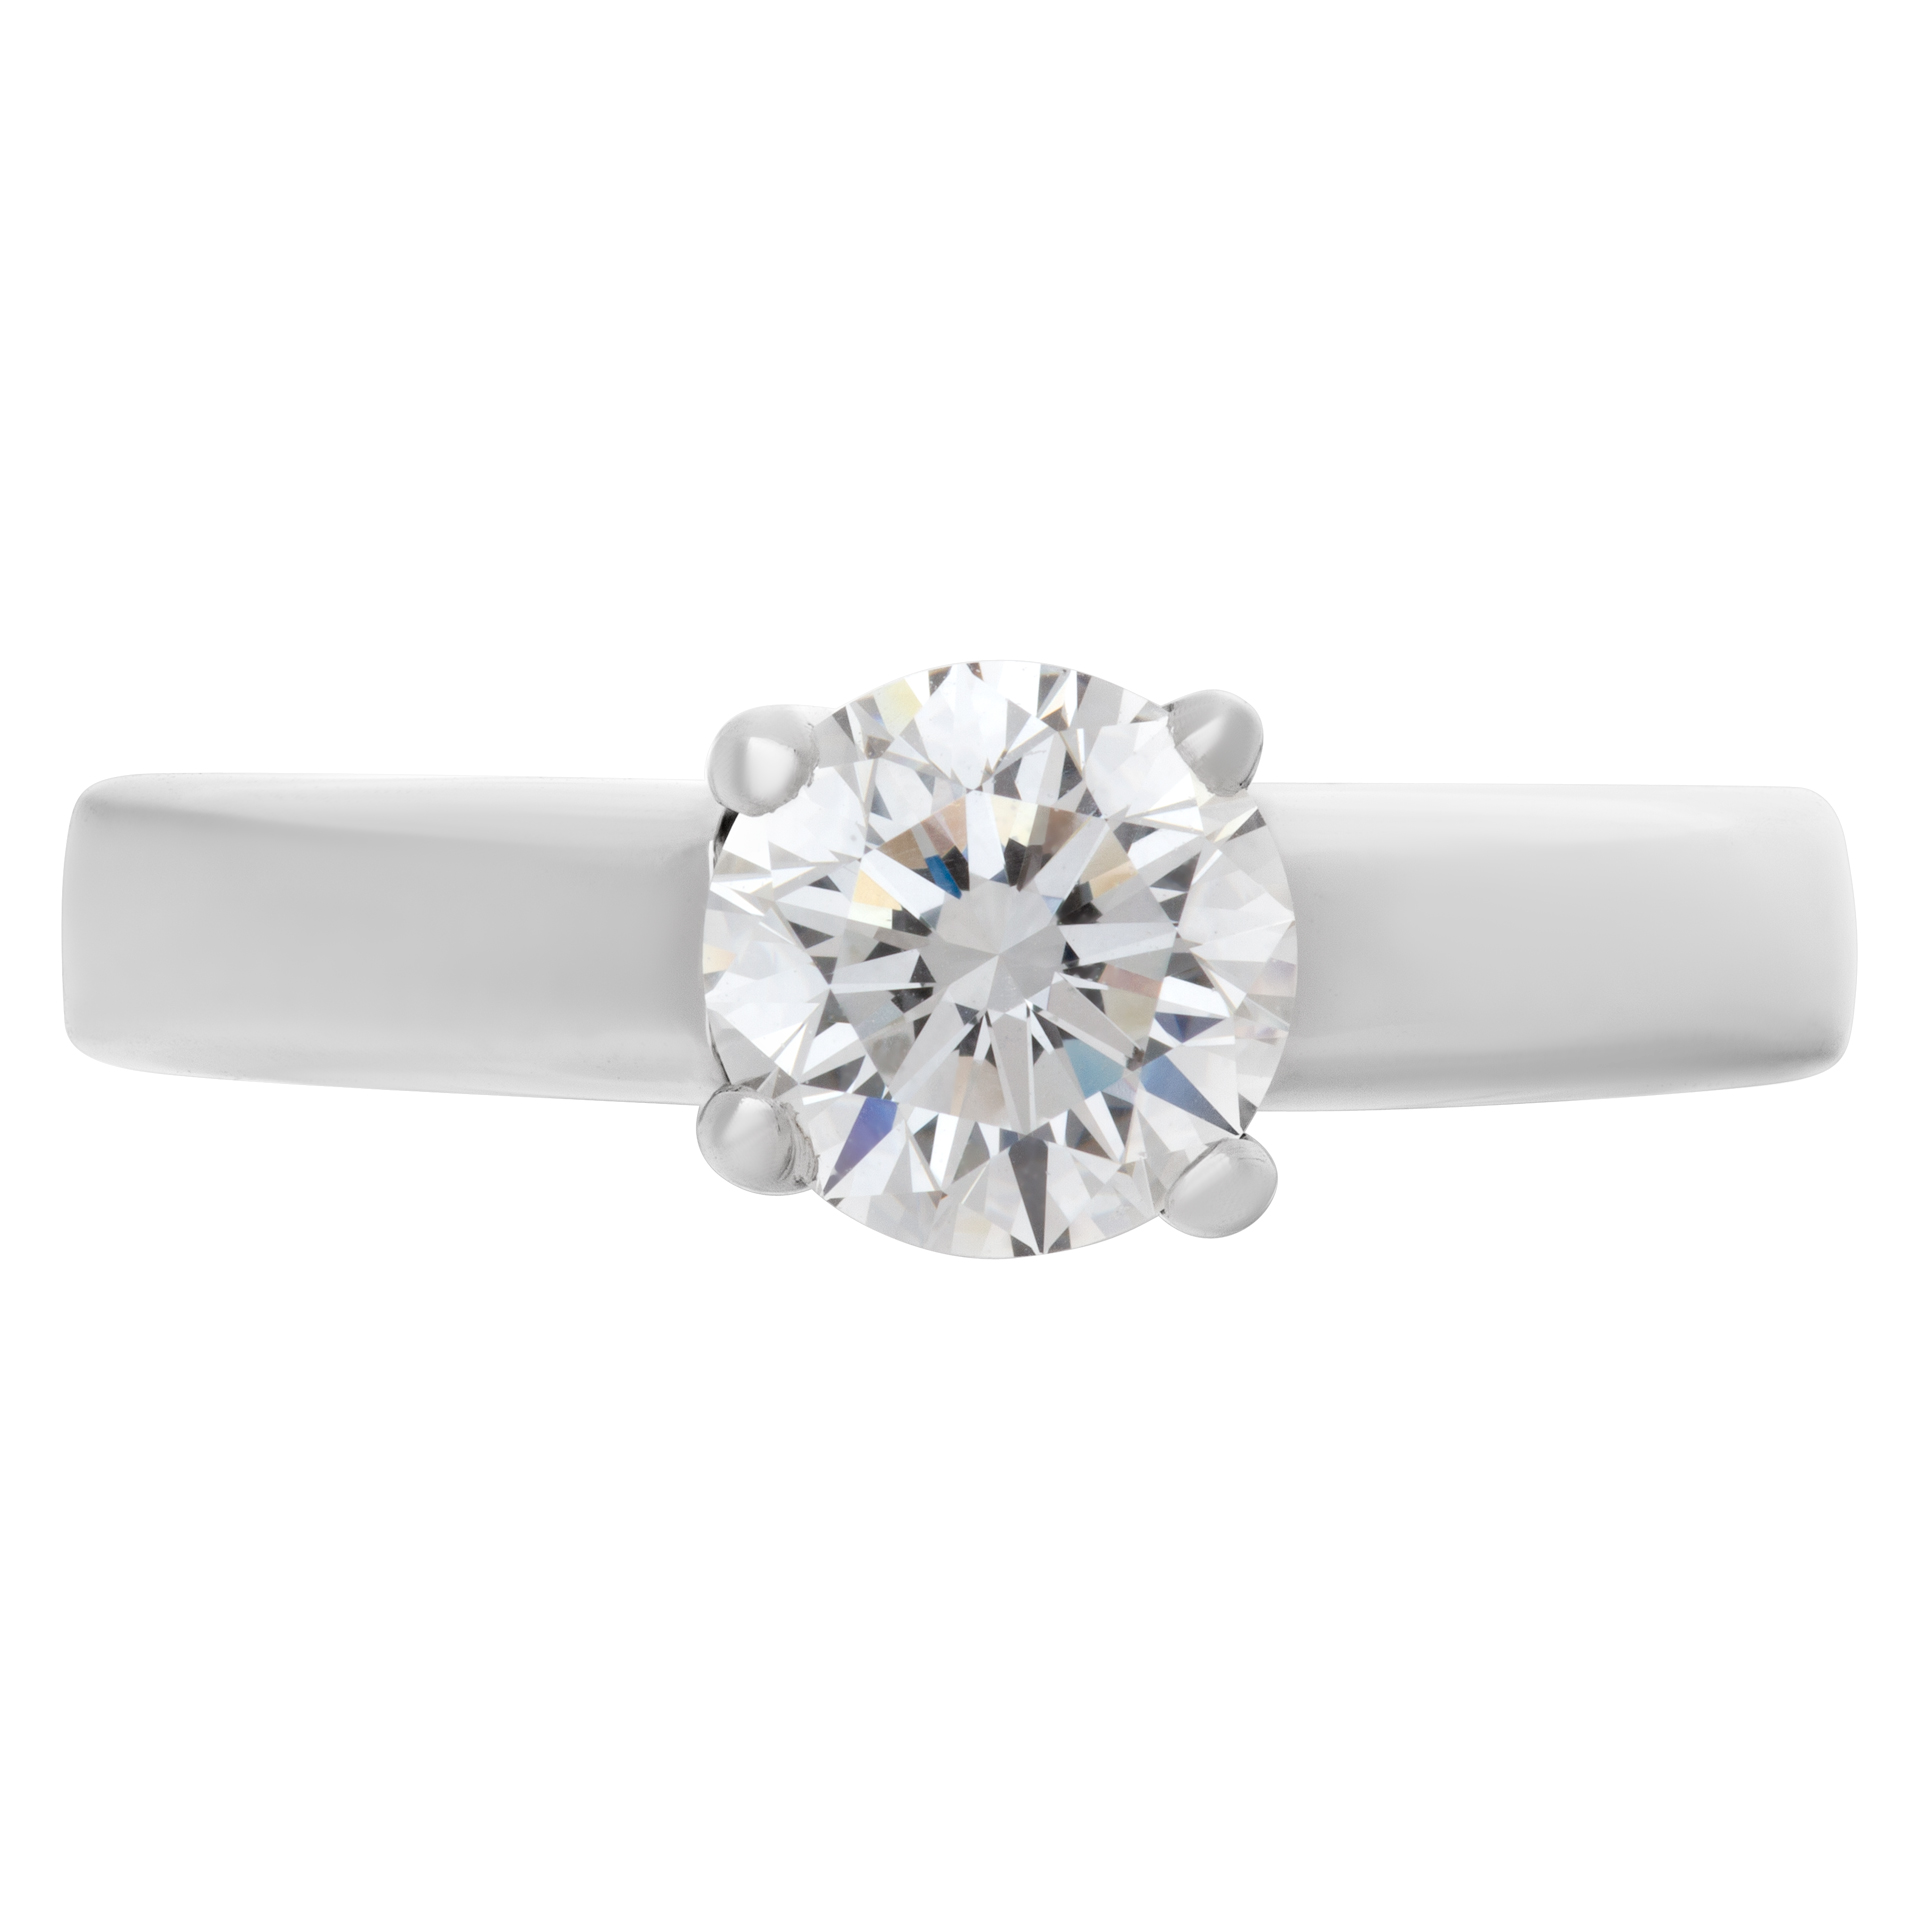 GIA Certified Diamond 1 ct (E color, VVS2 clarity) ring set in platinum. Size 5.25 image 2